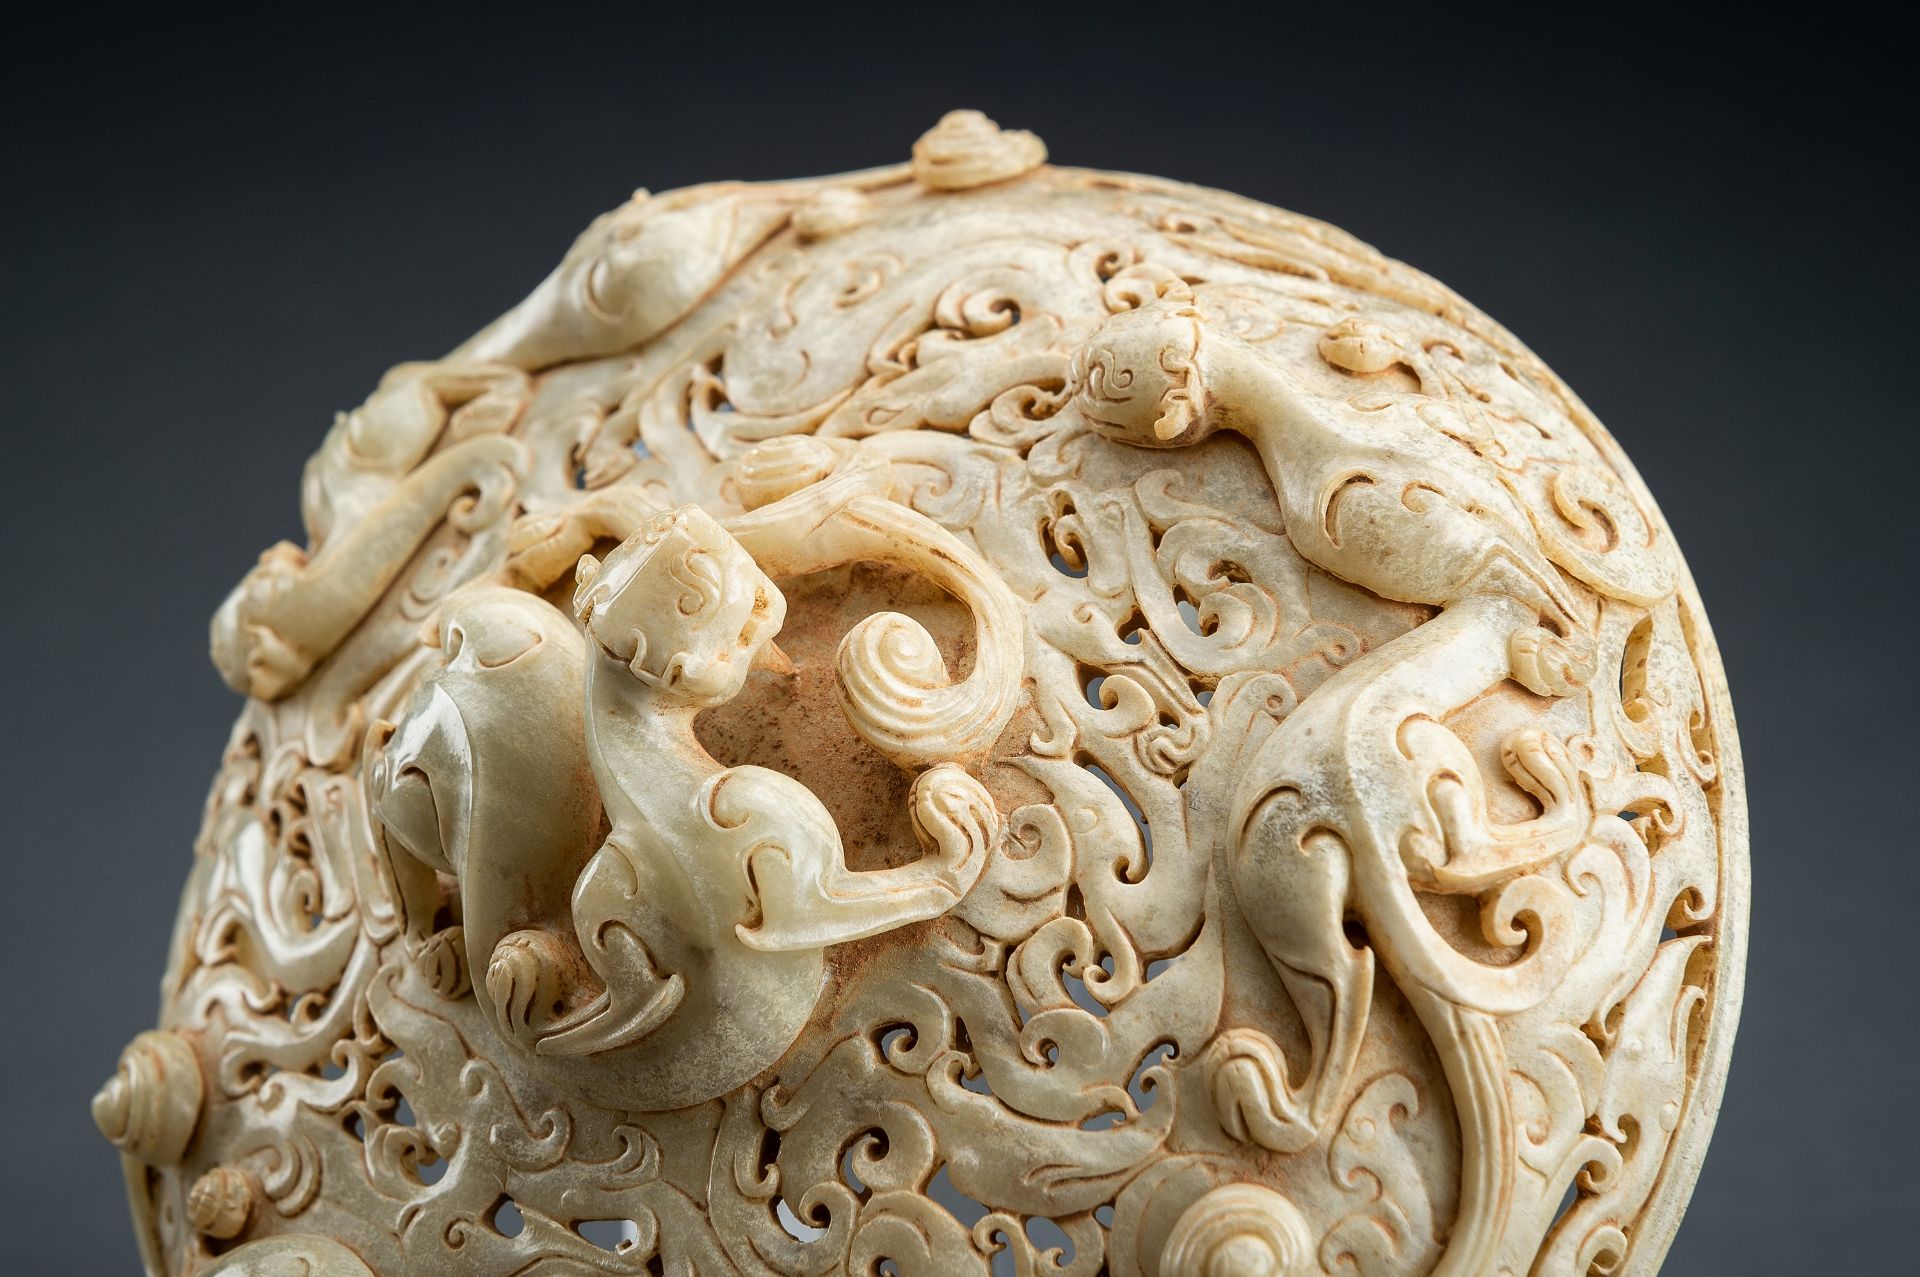 A LARGE AND IMPRESSIVE 3-PART RETICULATED CELADON JADE VESSEL - Image 9 of 19